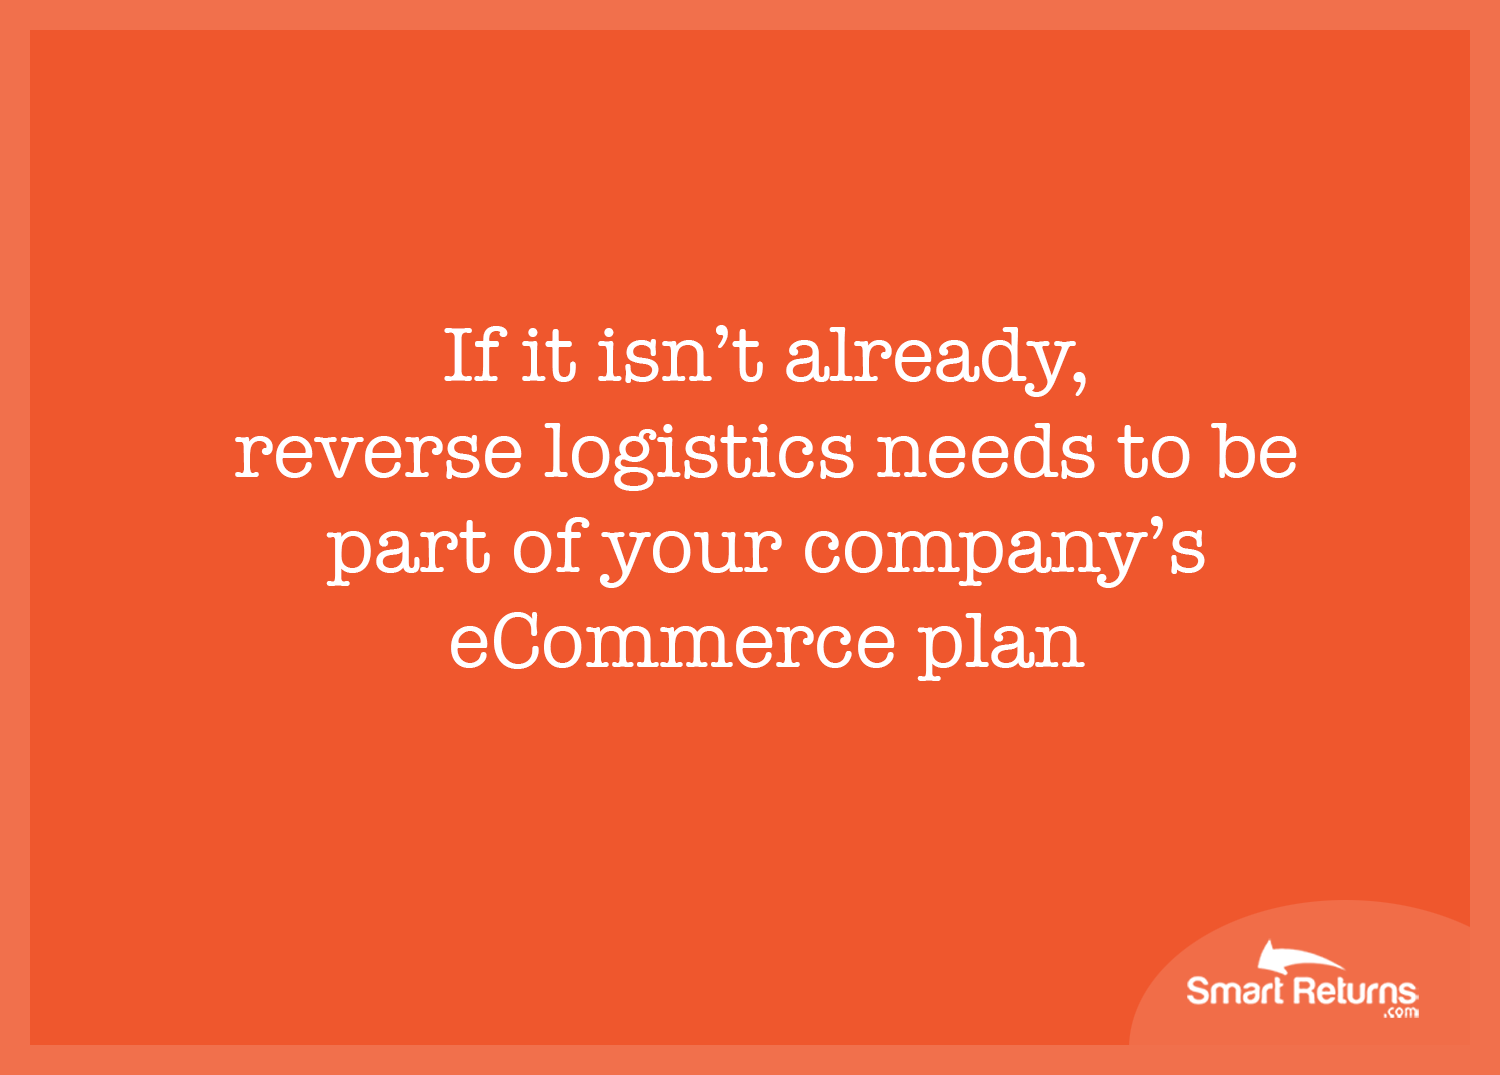 Returns as part of your eCommerce plan